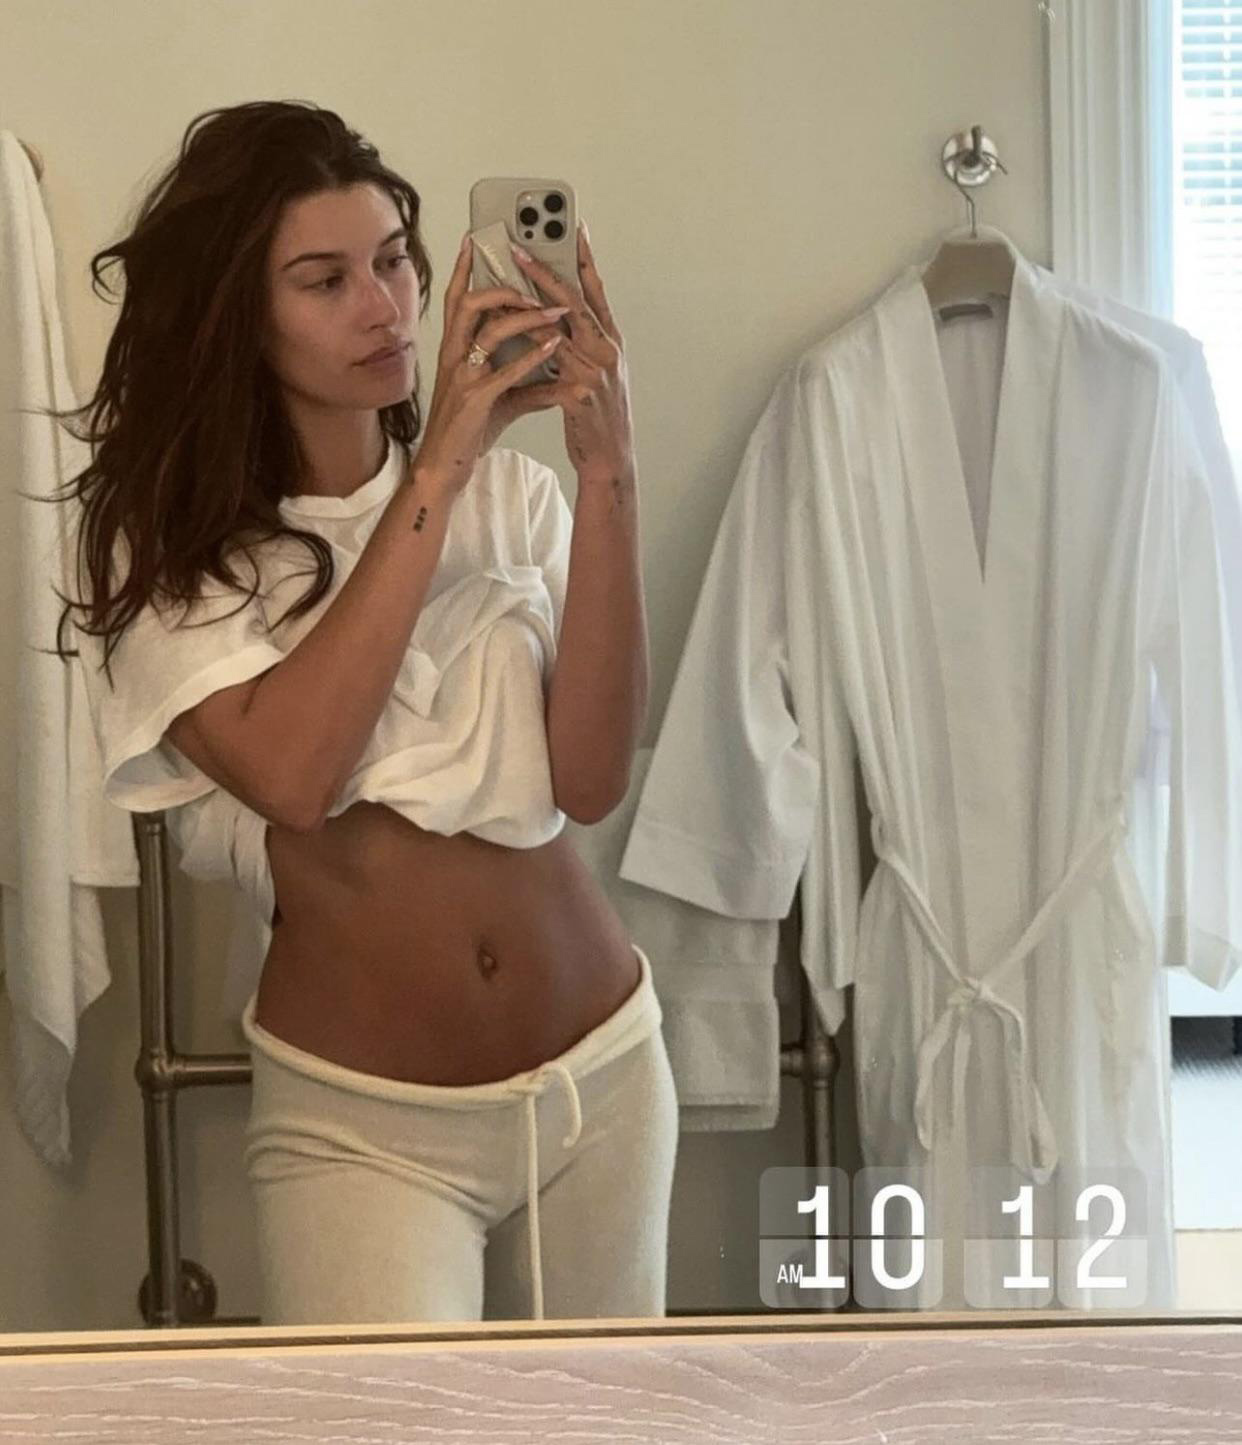 Fans thought Hailey's belly button was protruding